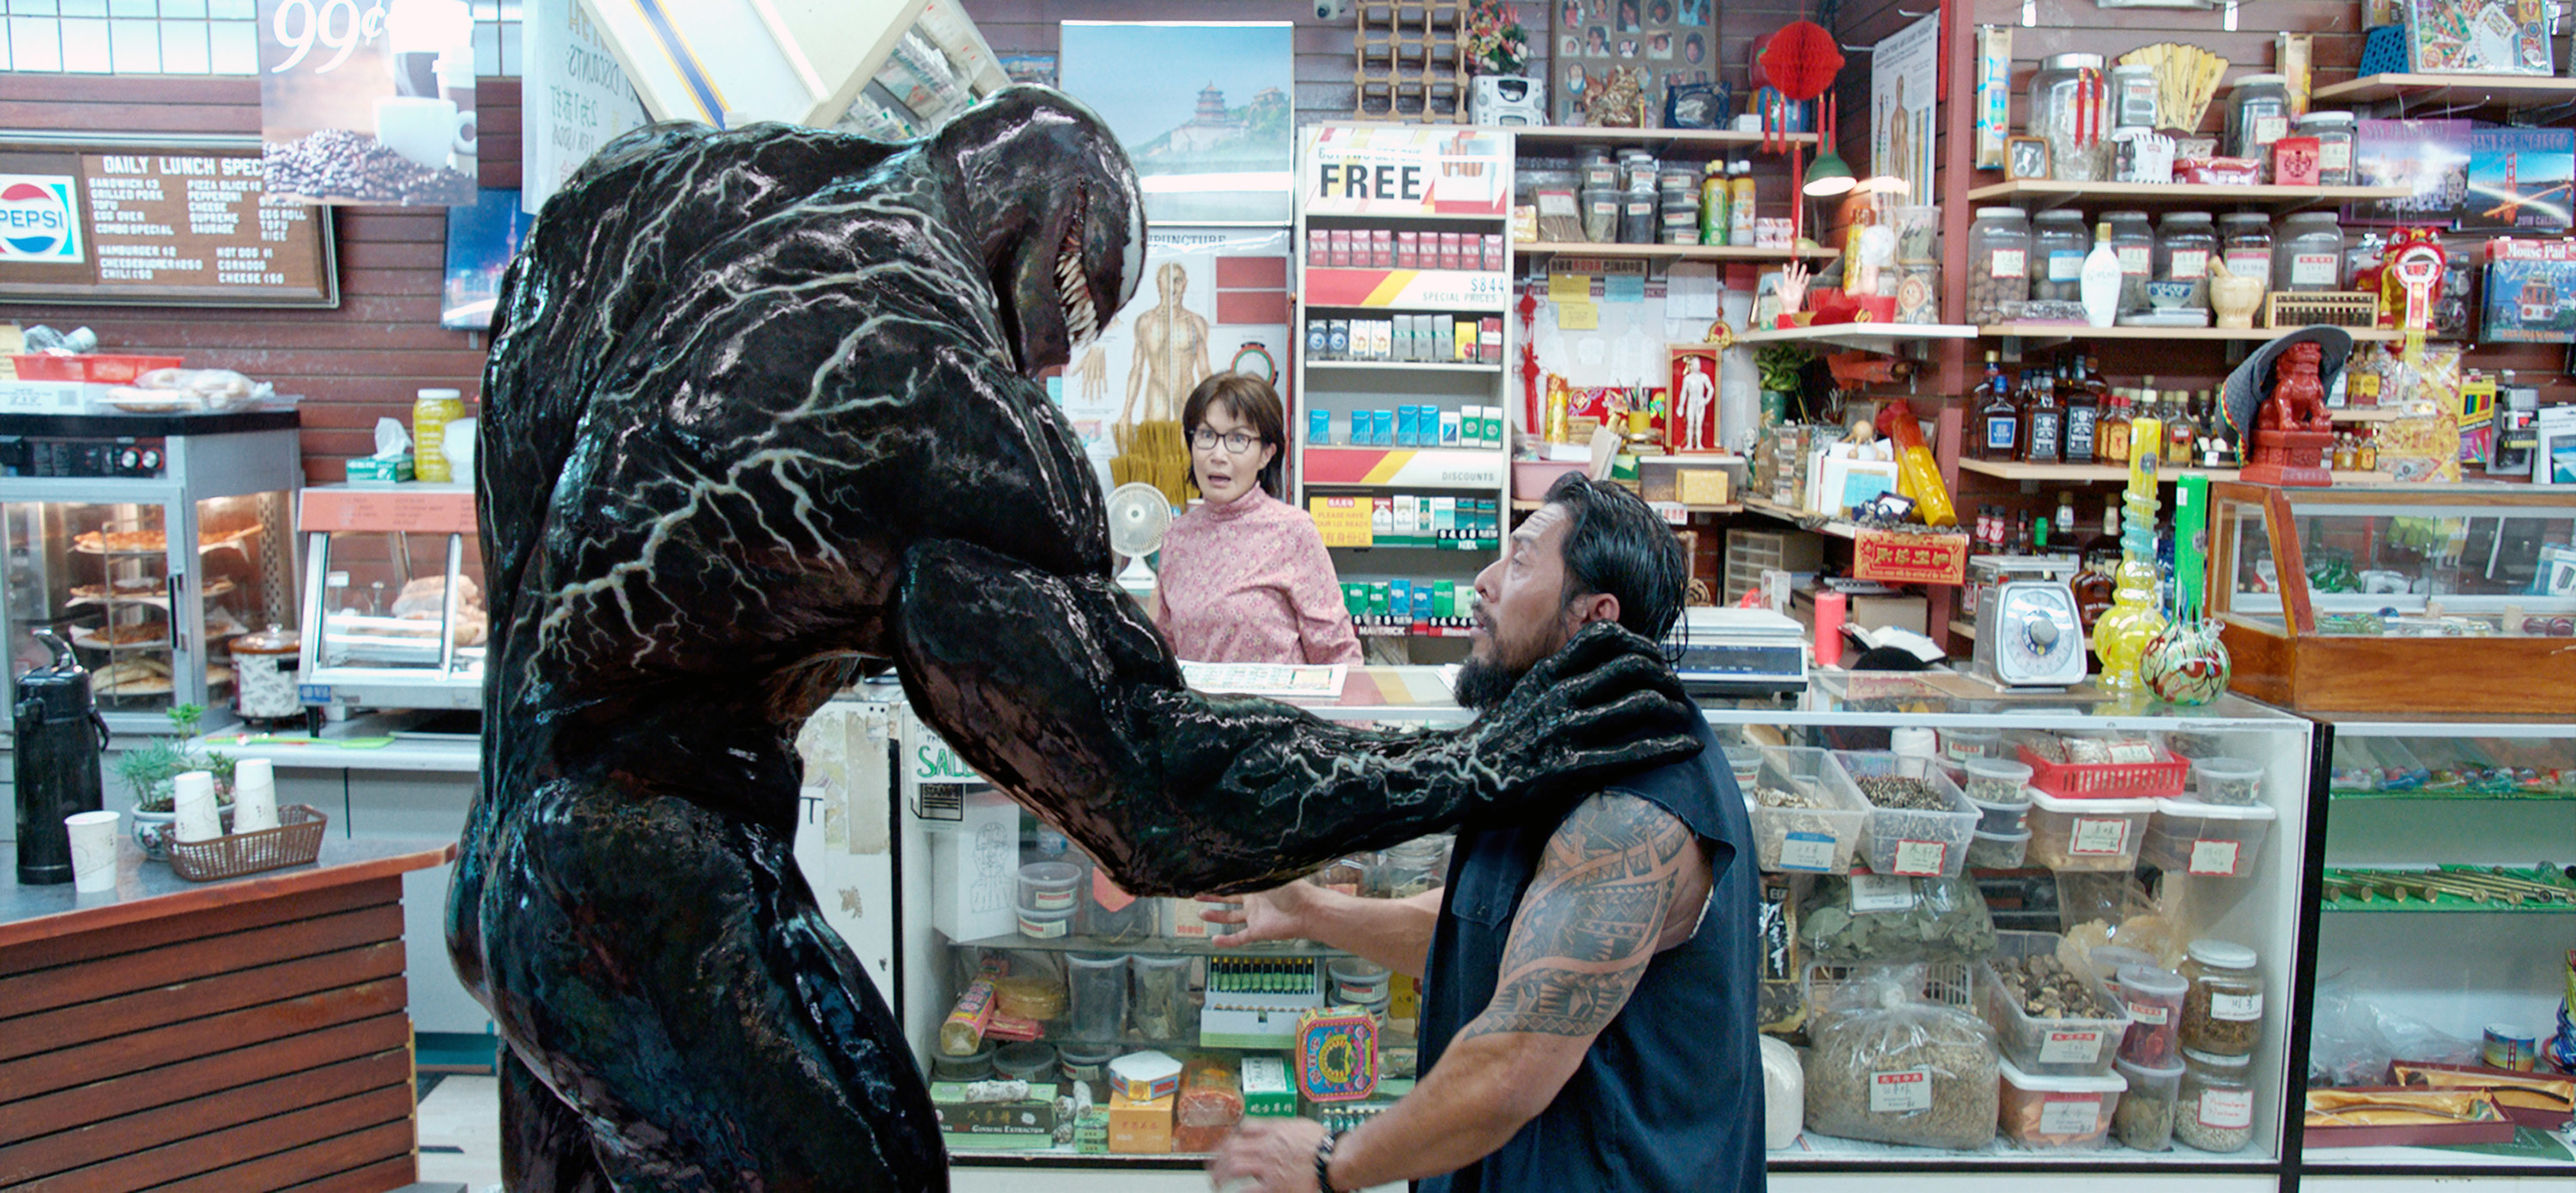 Venom grabbing a man by the throat in a convenience store